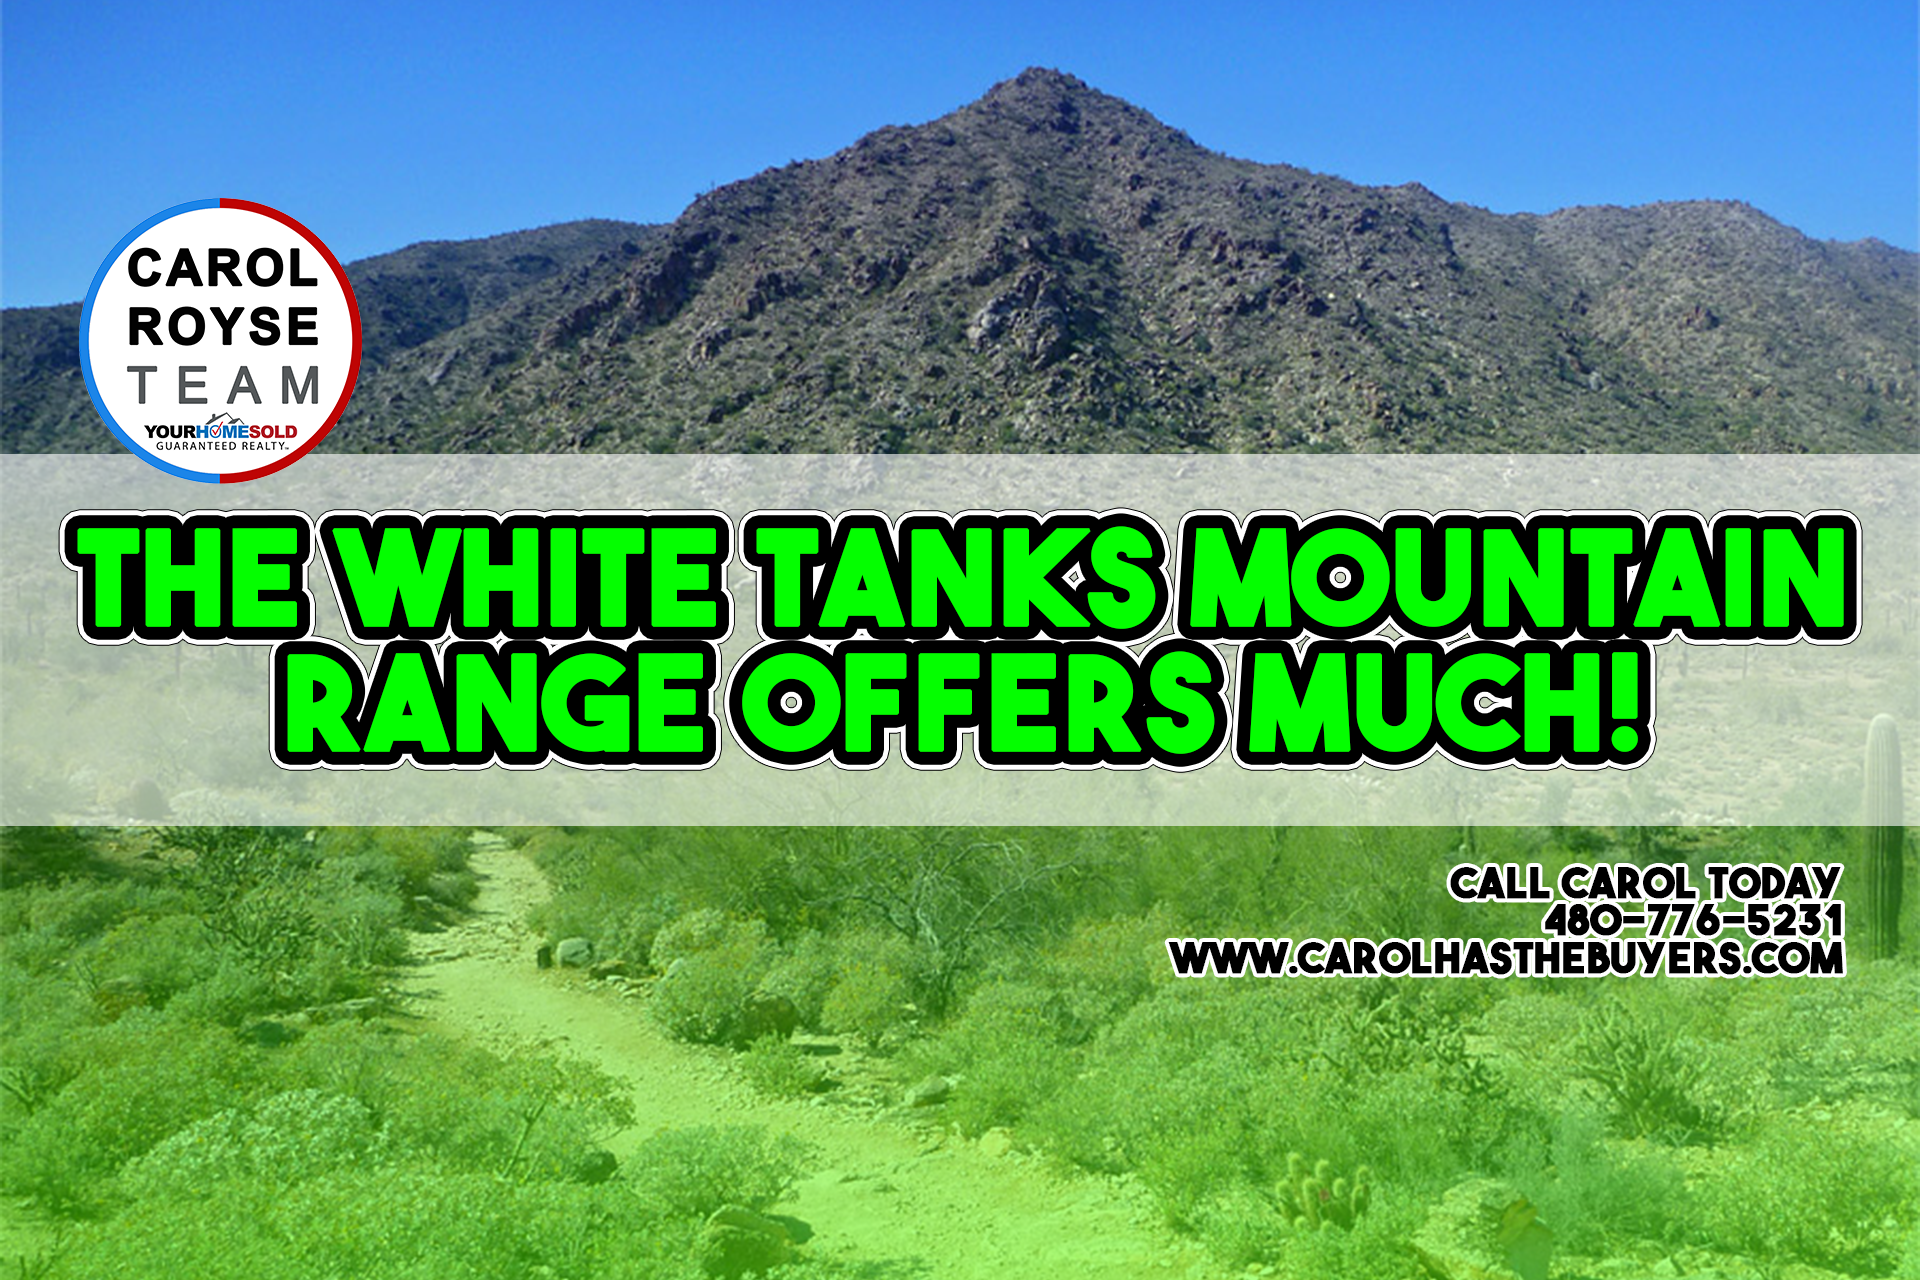 The White Tanks Mountain Range Offers Much!